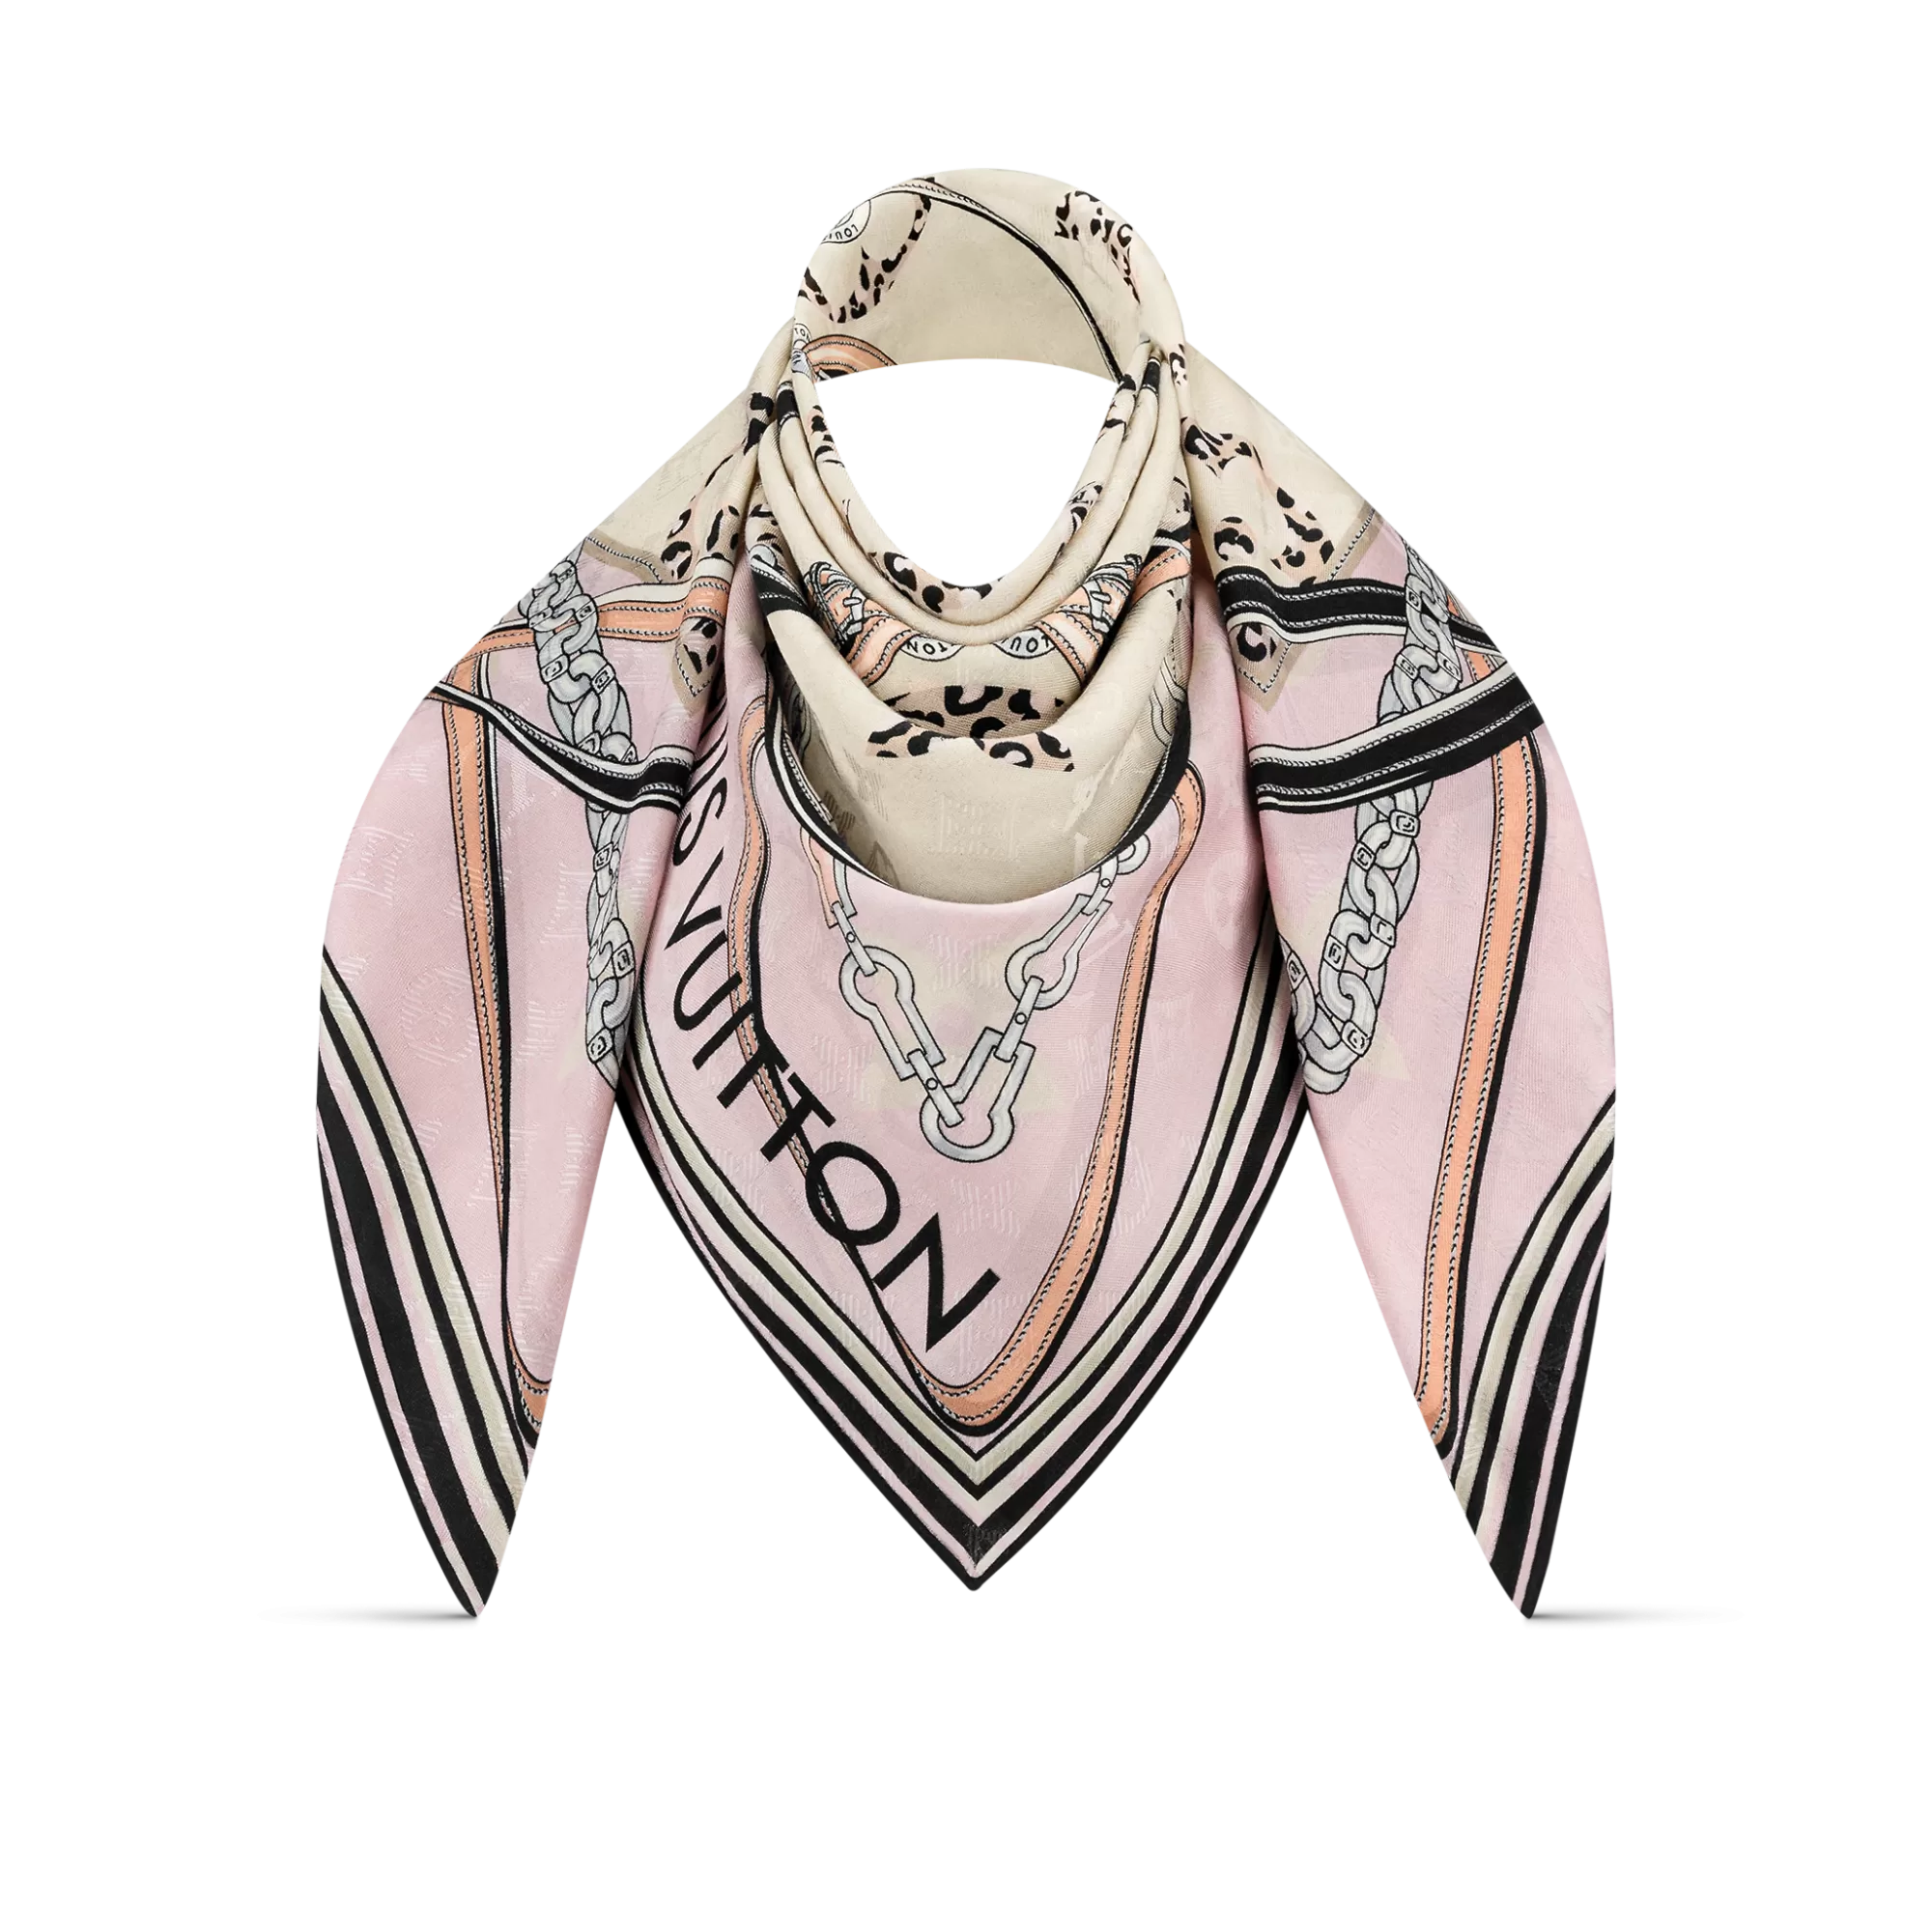 Barely there Louis Vuitton scarf. Good for people who like high